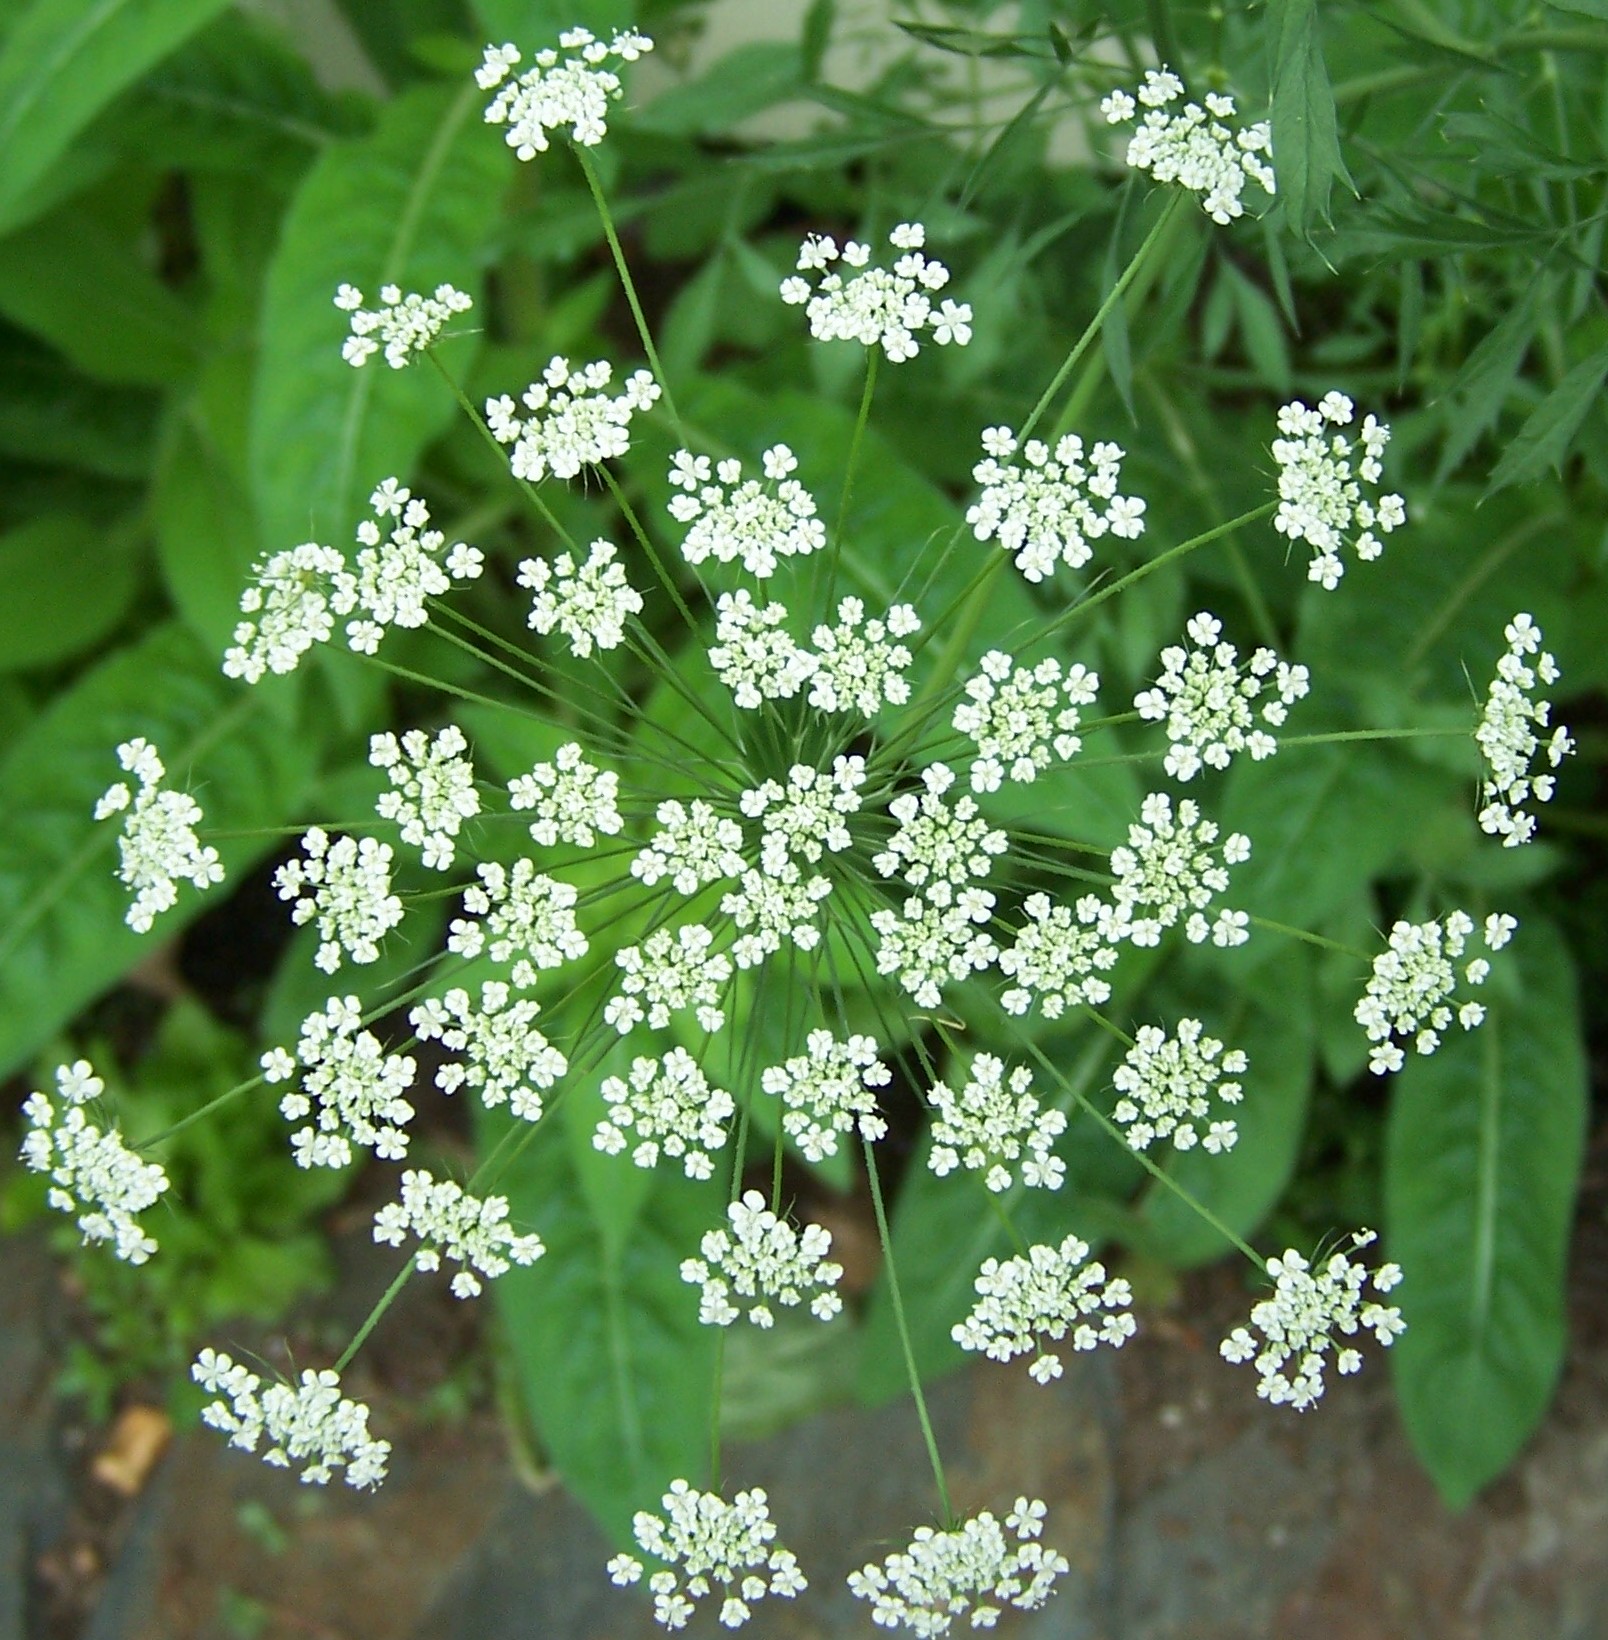 Queen Anne's Lace is a great attractant for beneficial insects.